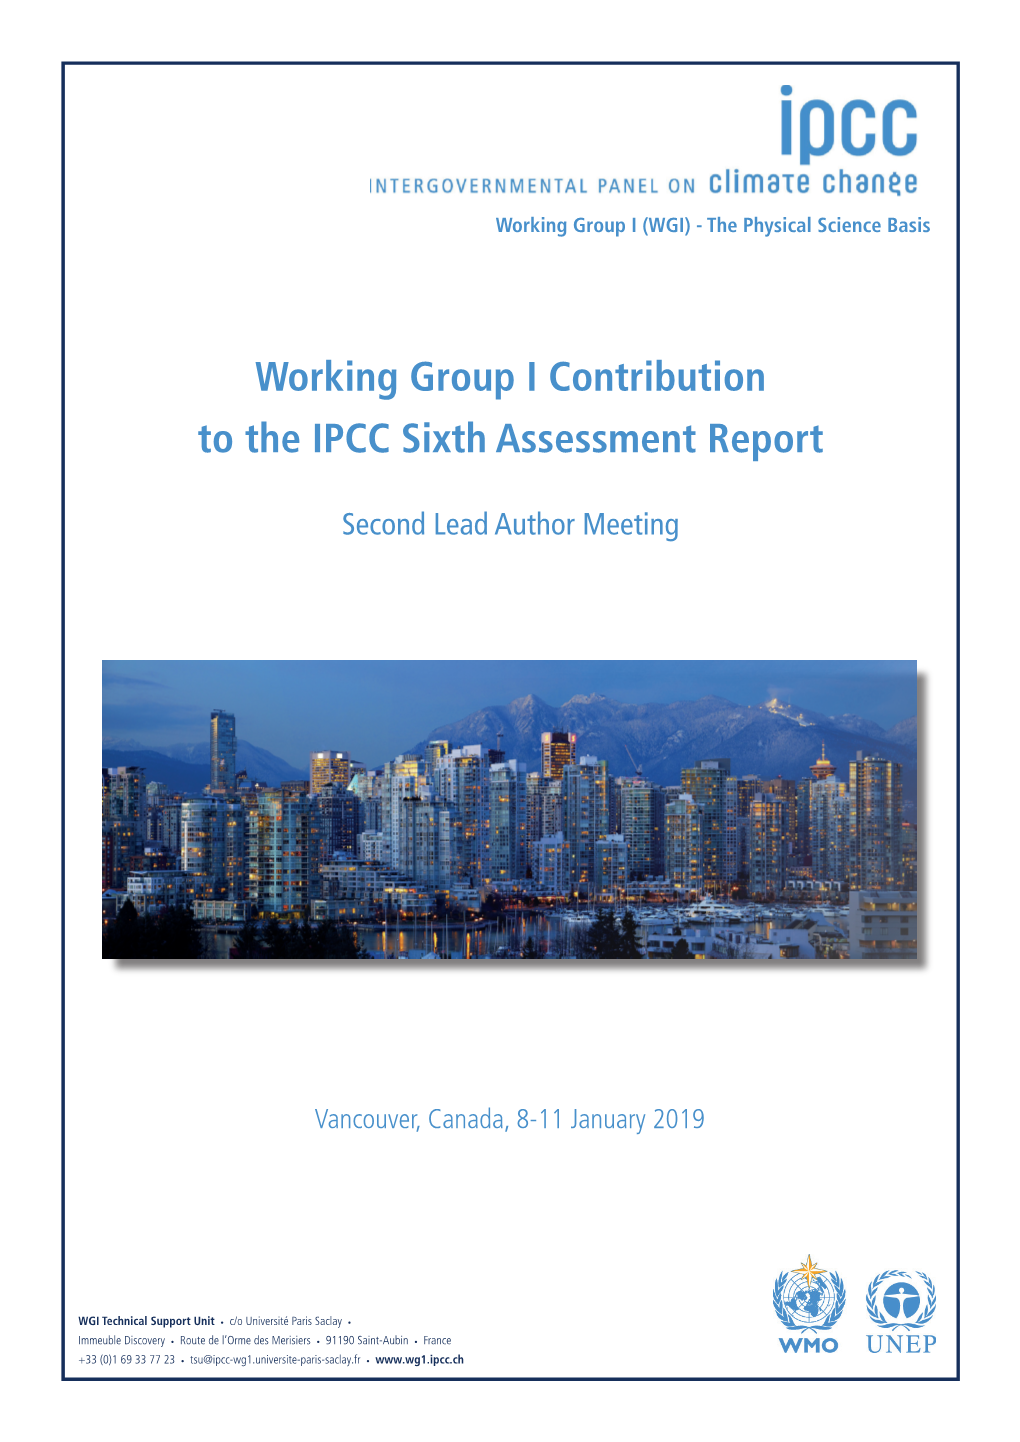 Working Group I Contribution to the IPCC Sixth Assessment Report